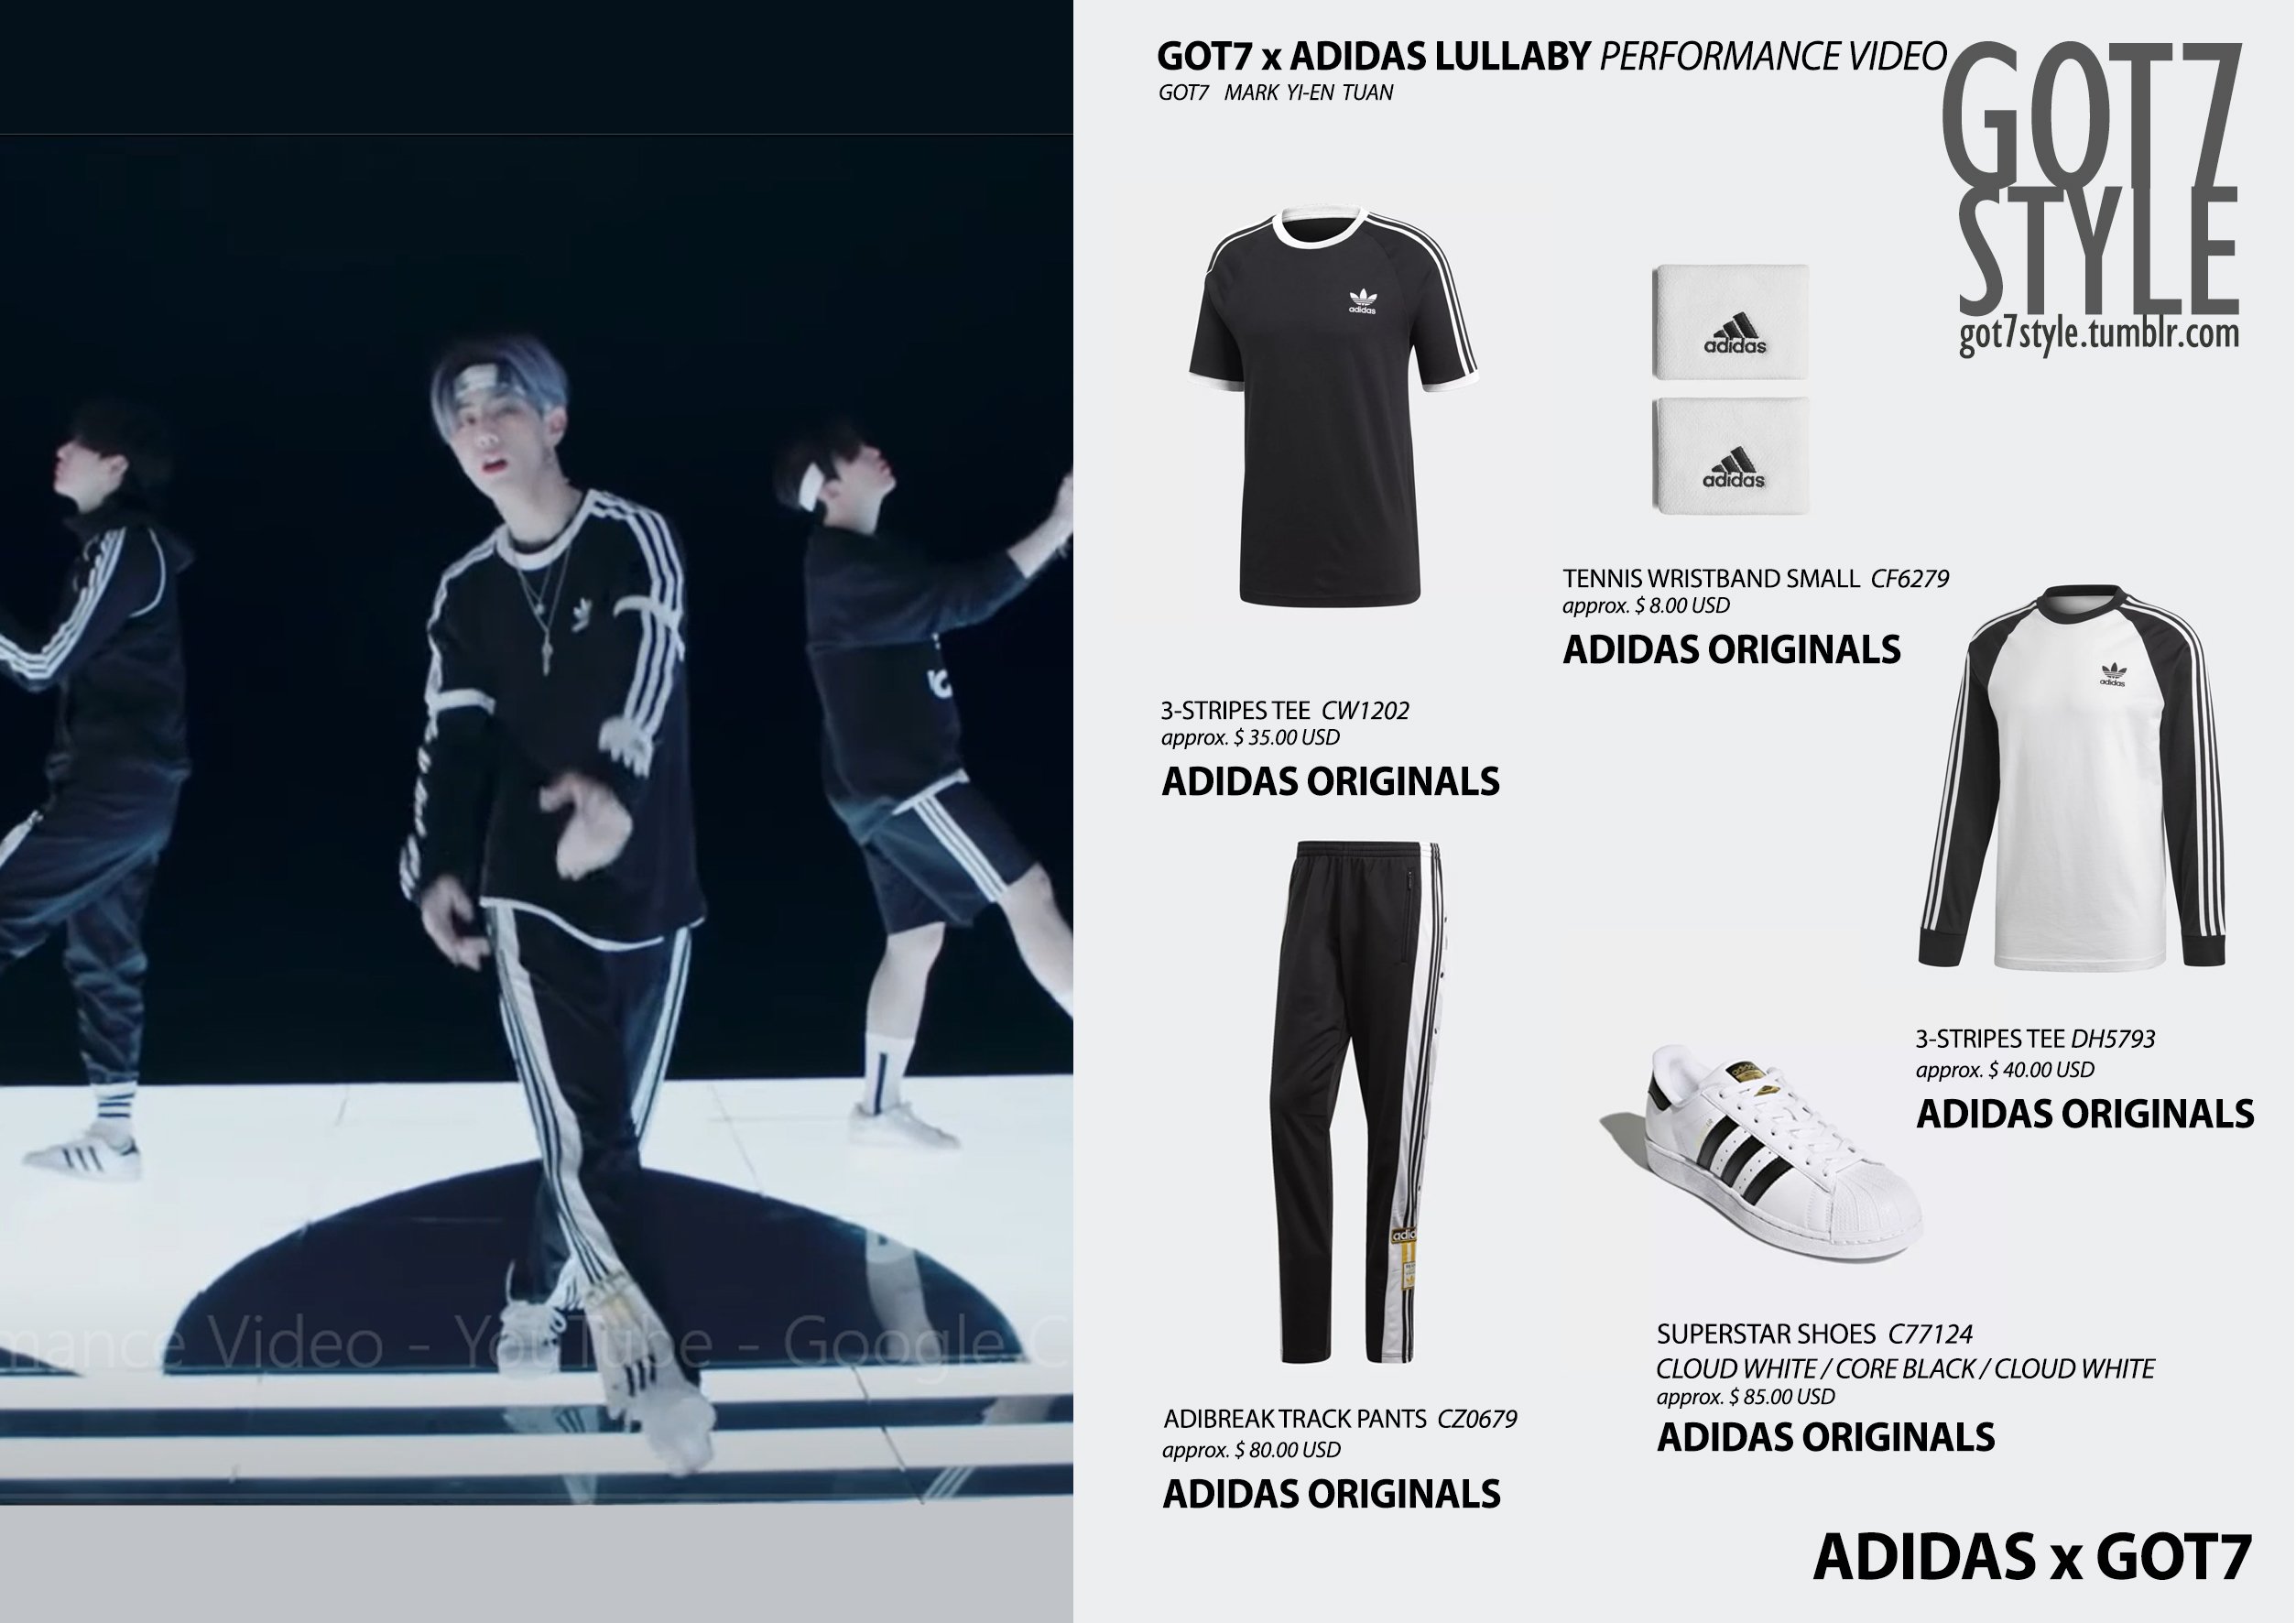 got7style❄️ on "[#GOT7Style] &lt;ADIDAS ORIGINALS&gt; - 3-STRIPES TEE CW1202 + 3-STRIPES TEE DH5793 PANTS - ADIBREAK TRACK PANTS CZ0679 SHOES - SUPERSTAR SHOES C77124 ACCESSORIES - TENNIS WRISTBAND SMALL CF6279 #